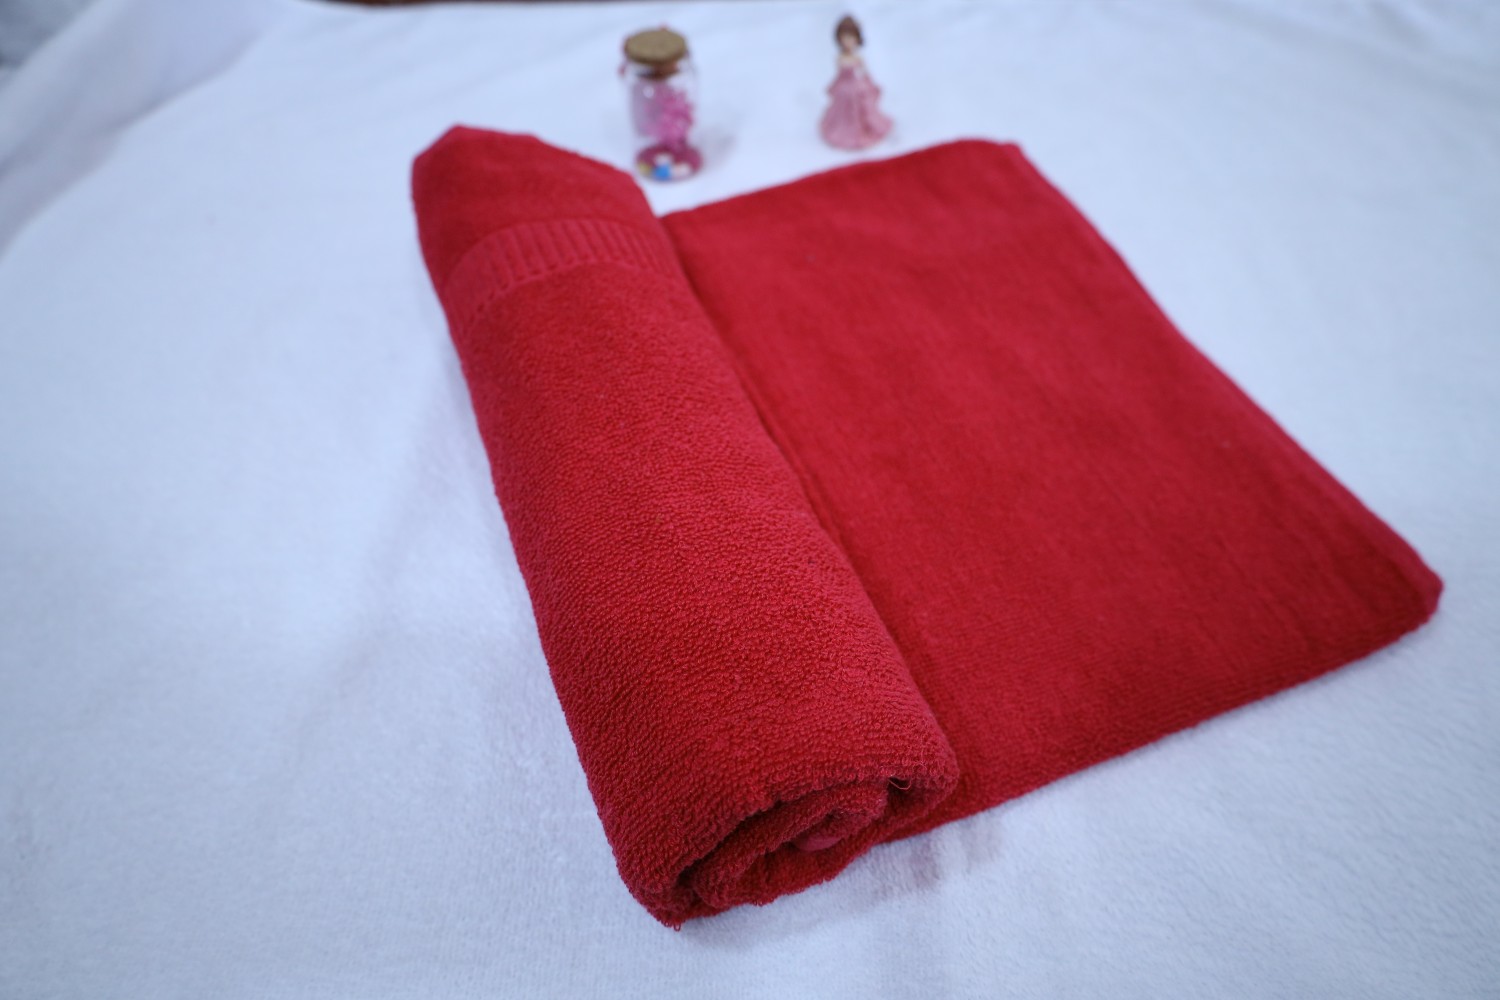 Taurusent Super Soft 100% Cotton High Absorbing Turkey Bath Towel, Size: 30x60 inches (450 GSM) - Pack of 1(RED)